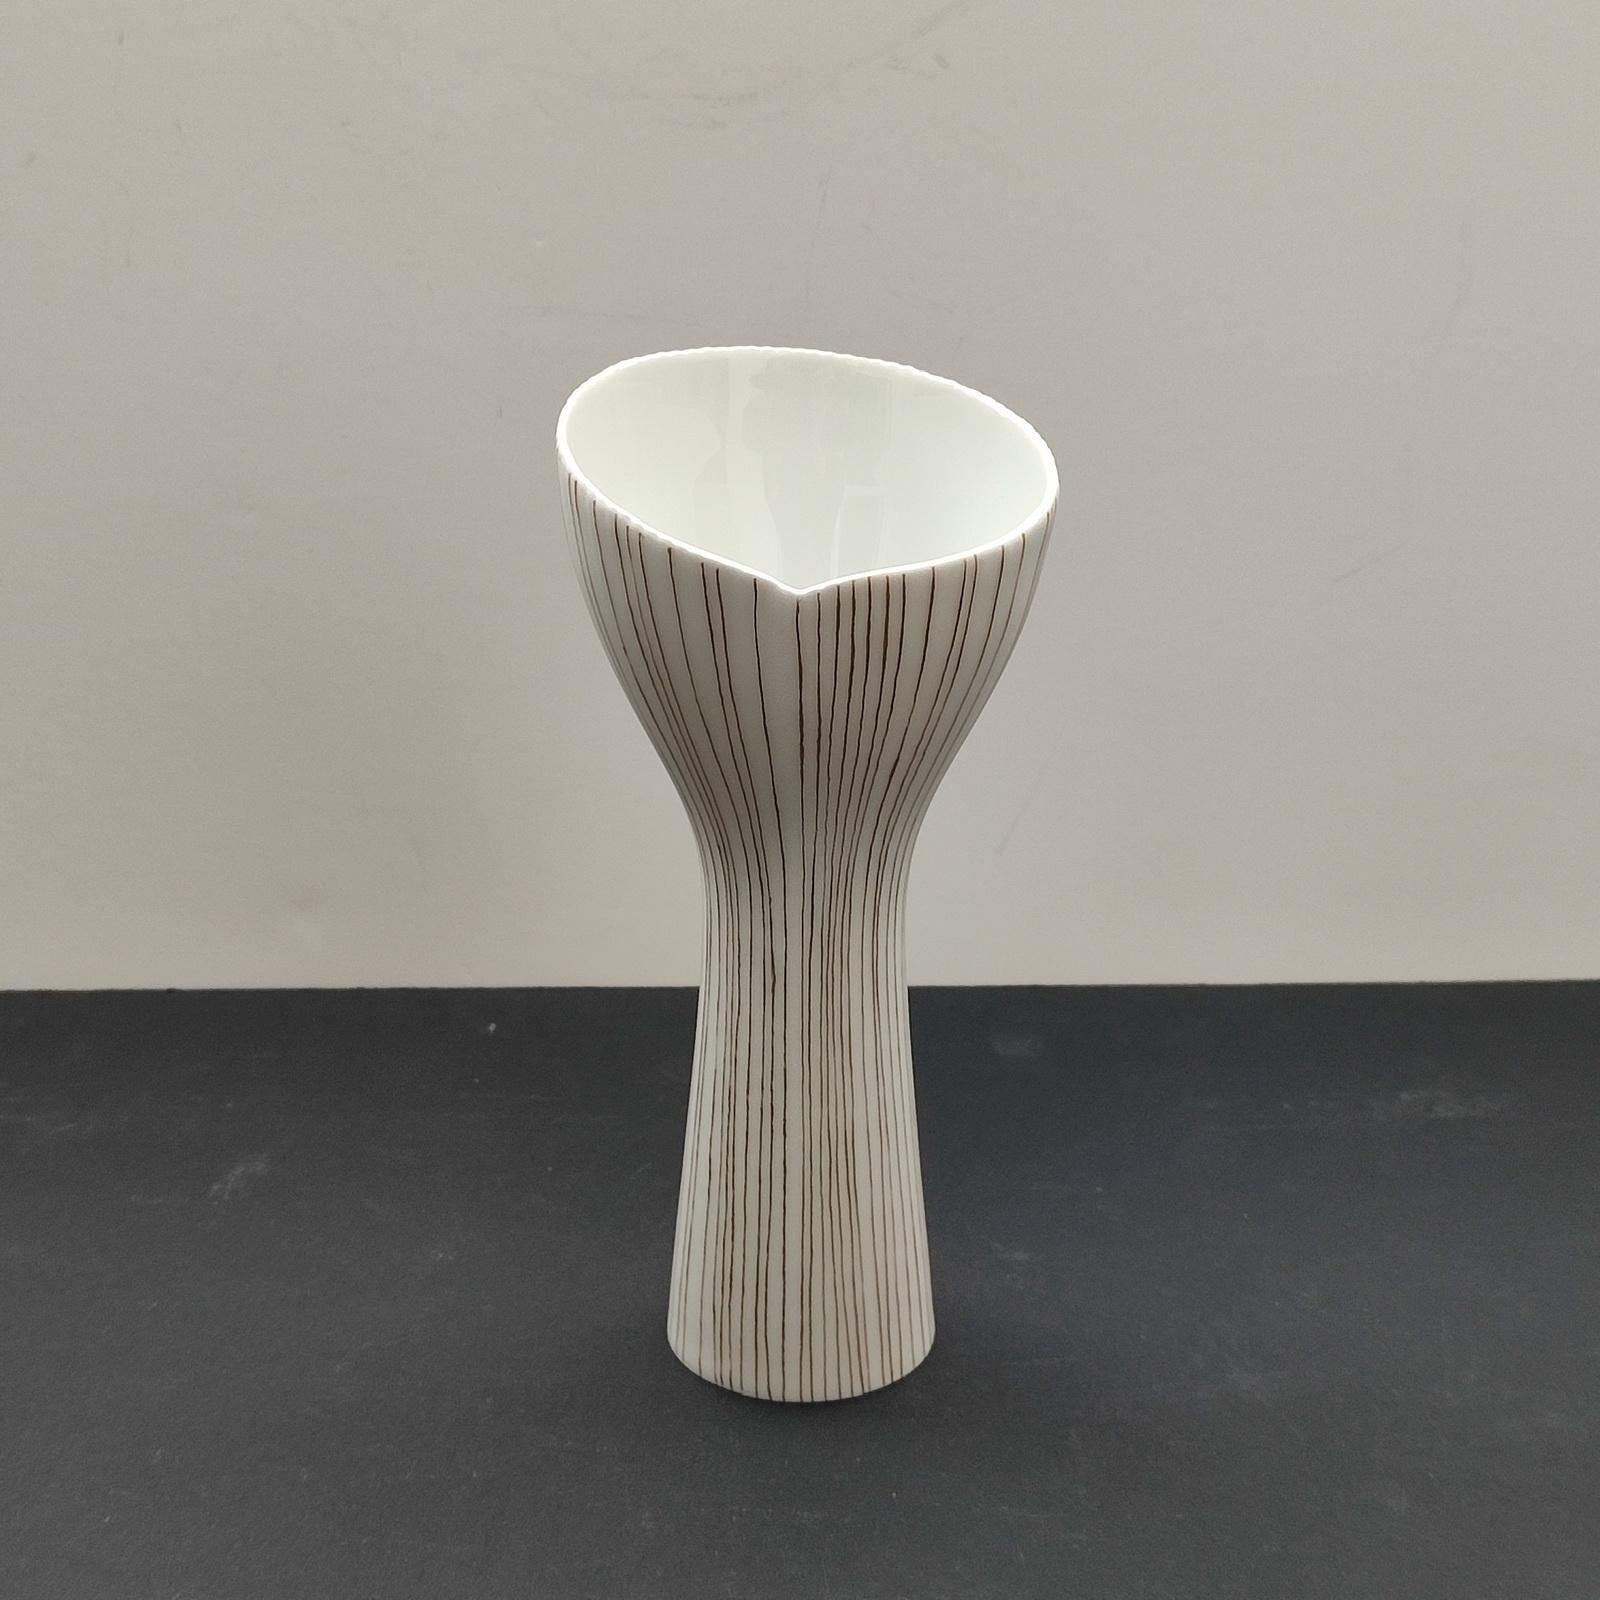 Tapio Wirkkala for Rosenthal, Germany
Wide mouthed vase in white porcelain, ribbed rim, hand painted with fine thin gold lines. Very good used condition.
Dimensions:
Height 17 cm [6 3/4